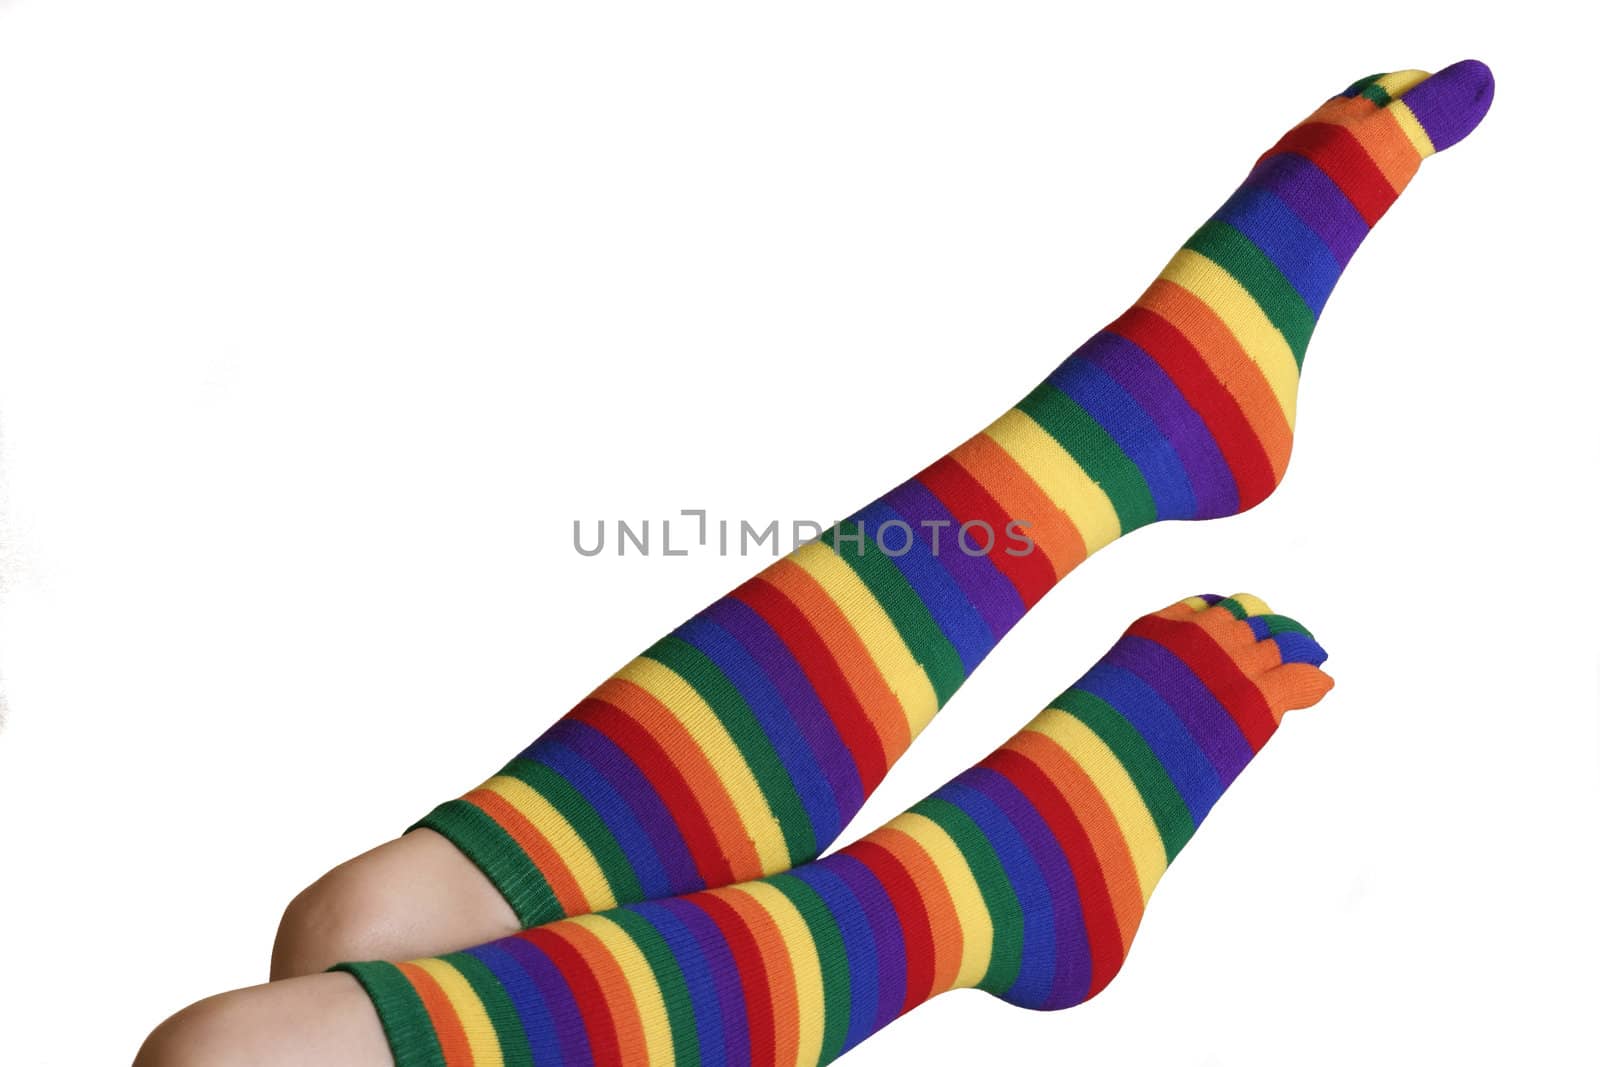 Feet and legs with knee length colourful socks by lovleah